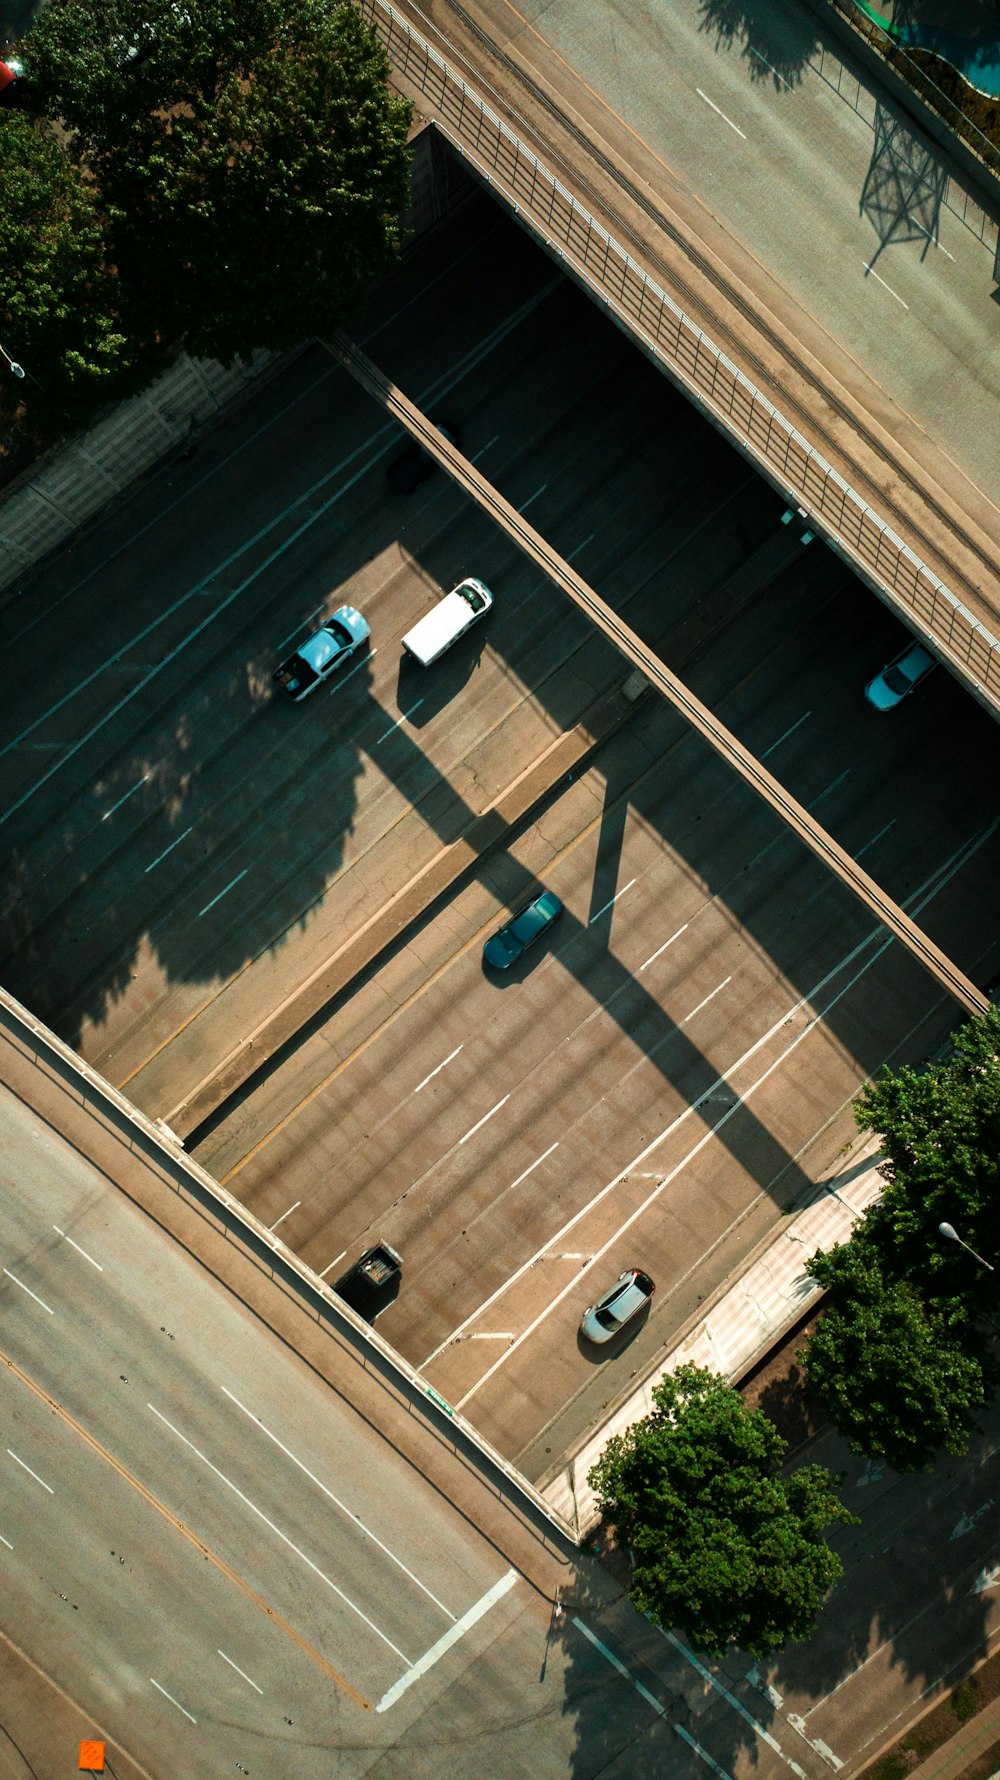 an overhead view of a parking lot with cars parked in it